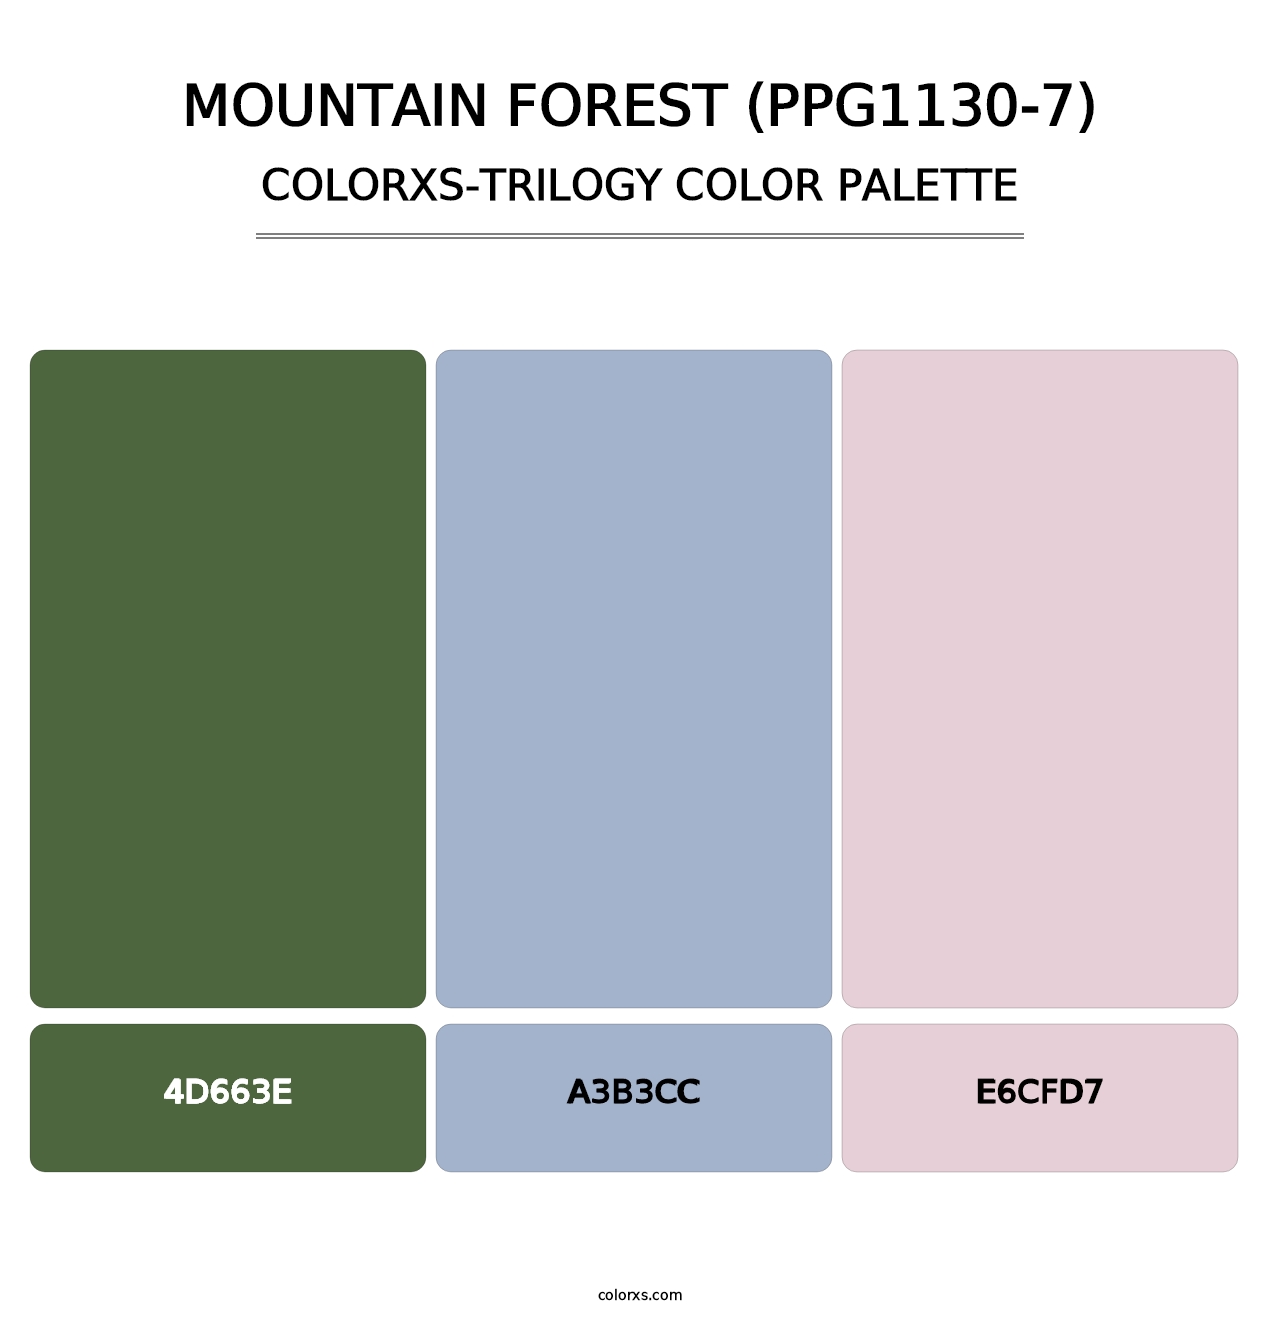 Mountain Forest (PPG1130-7) - Colorxs Trilogy Palette